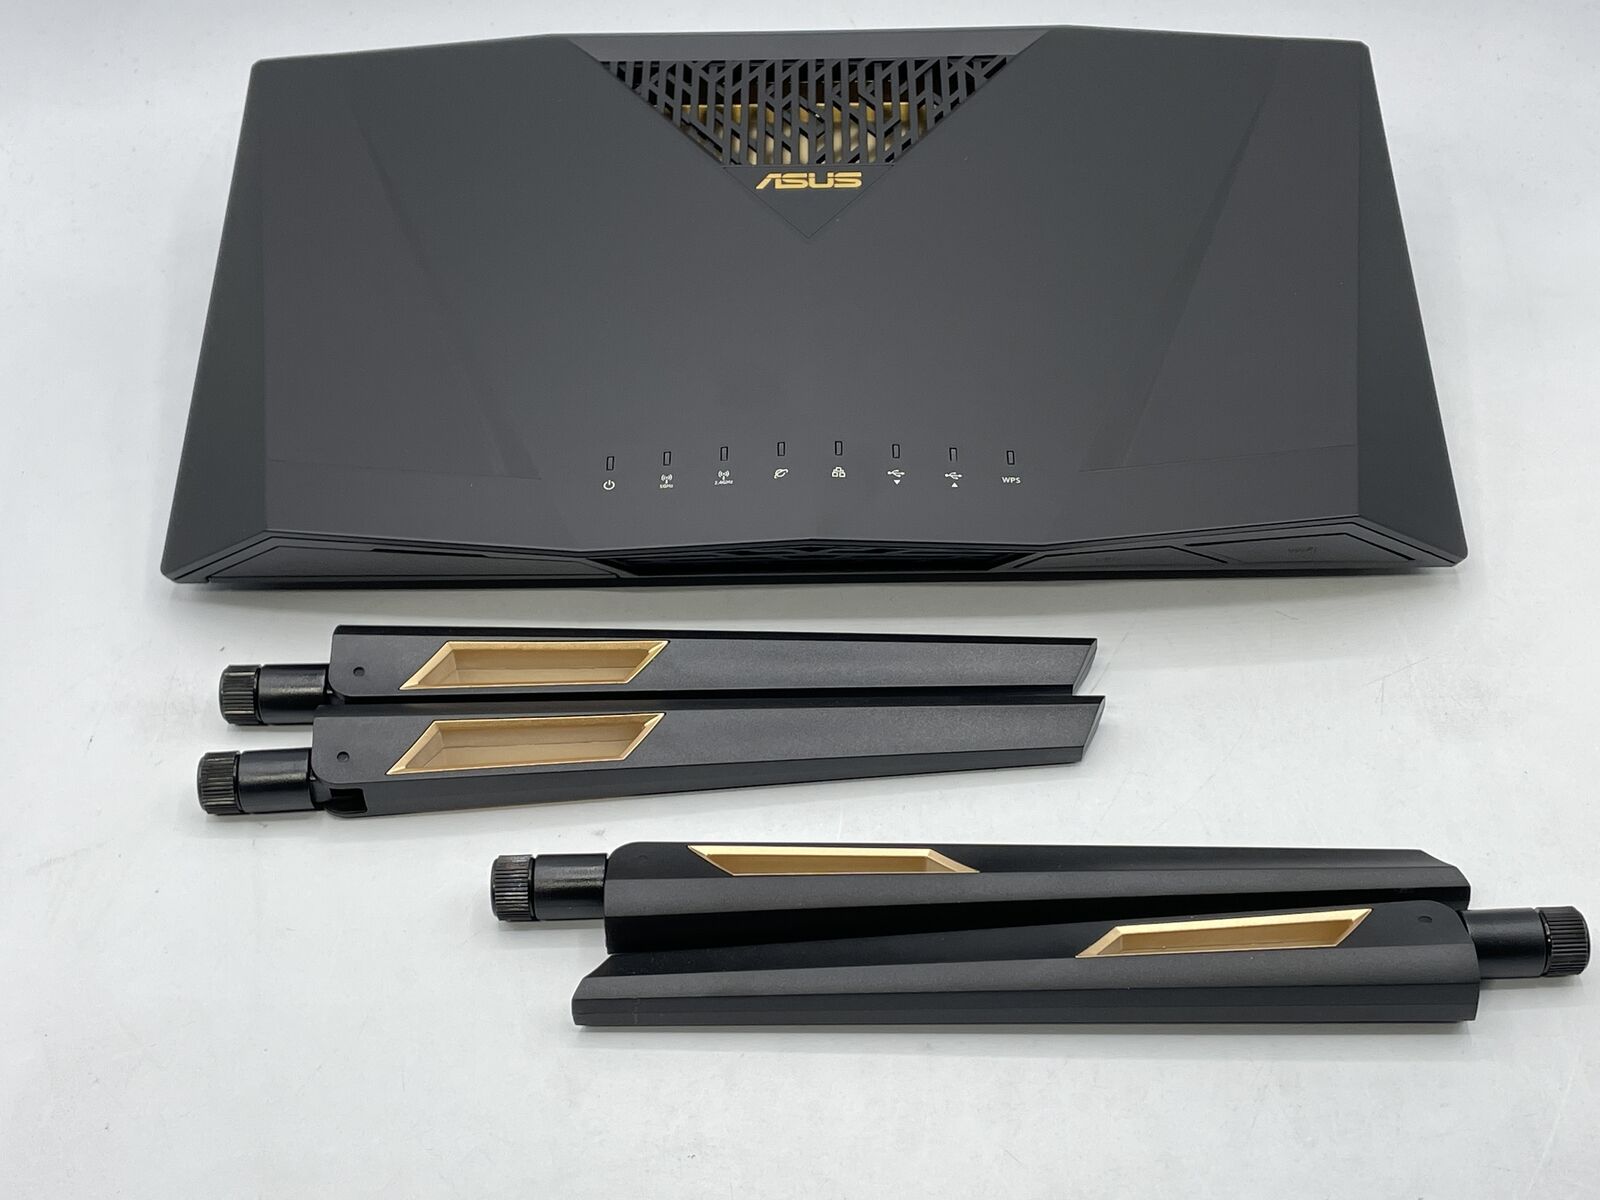 Asus RT-AX88U AX6000 WiFi 6 Dual Band Wireless Gaming Router Black New Open Box